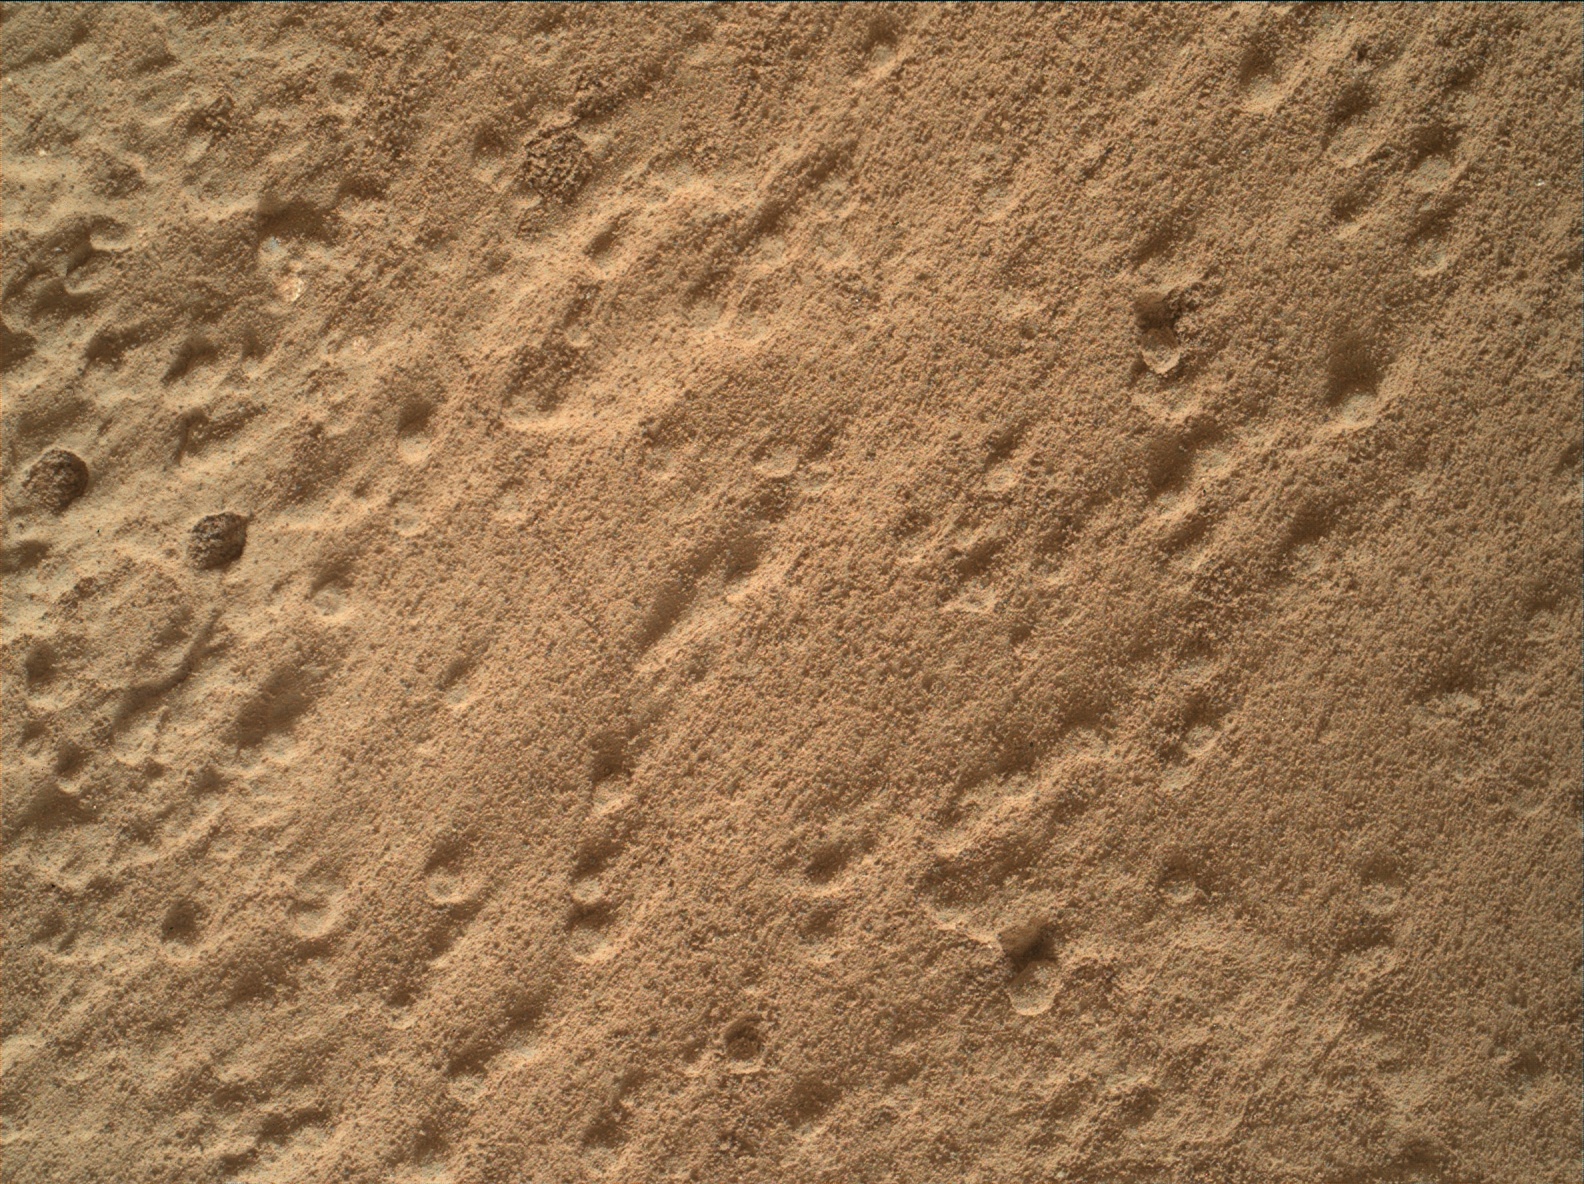 Nasa's Mars rover Curiosity acquired this image using its Mars Hand Lens Imager (MAHLI) on Sol 295